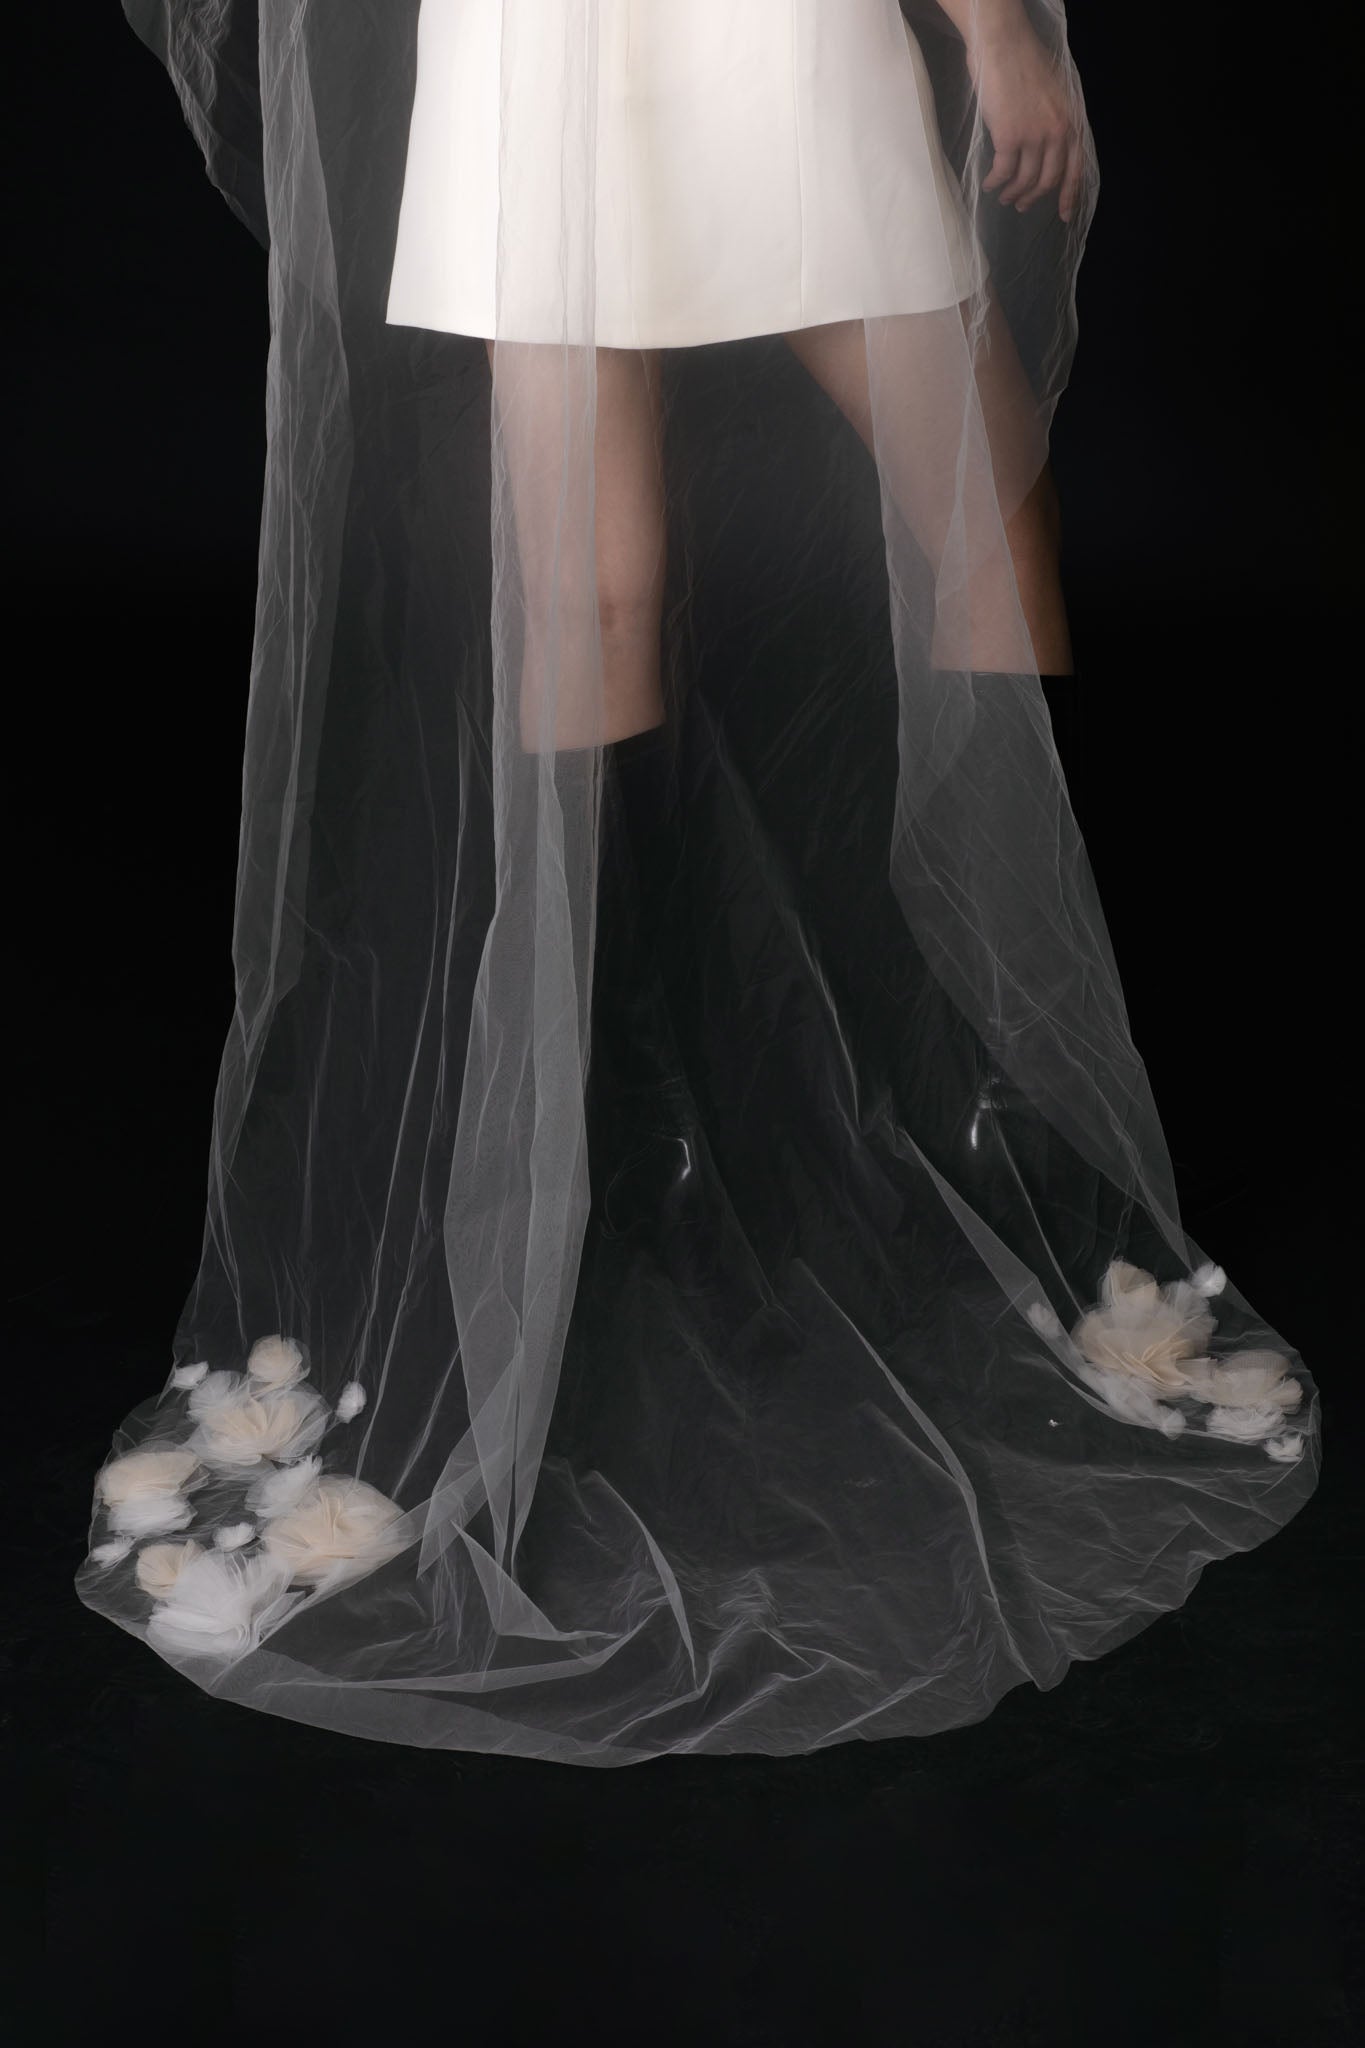 Jardin drop veil, featuring delicate handmade tulle flowers, is the perfect statement piece for the bride who wants to stand out on her wedding day